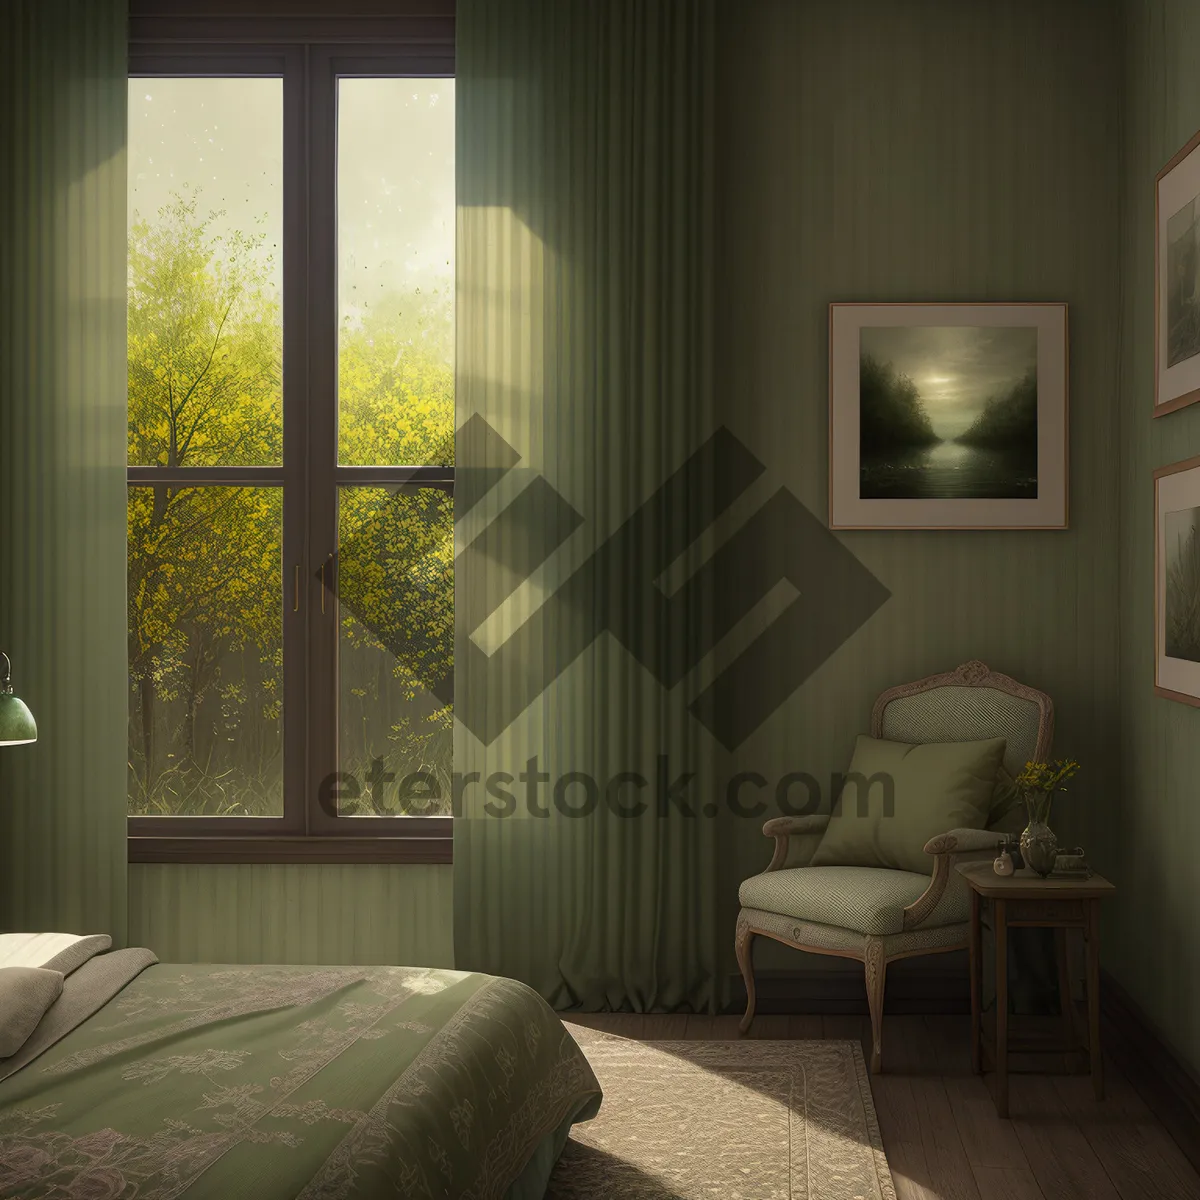 Picture of Modern Luxury Bedroom with Stylish Window Blinds